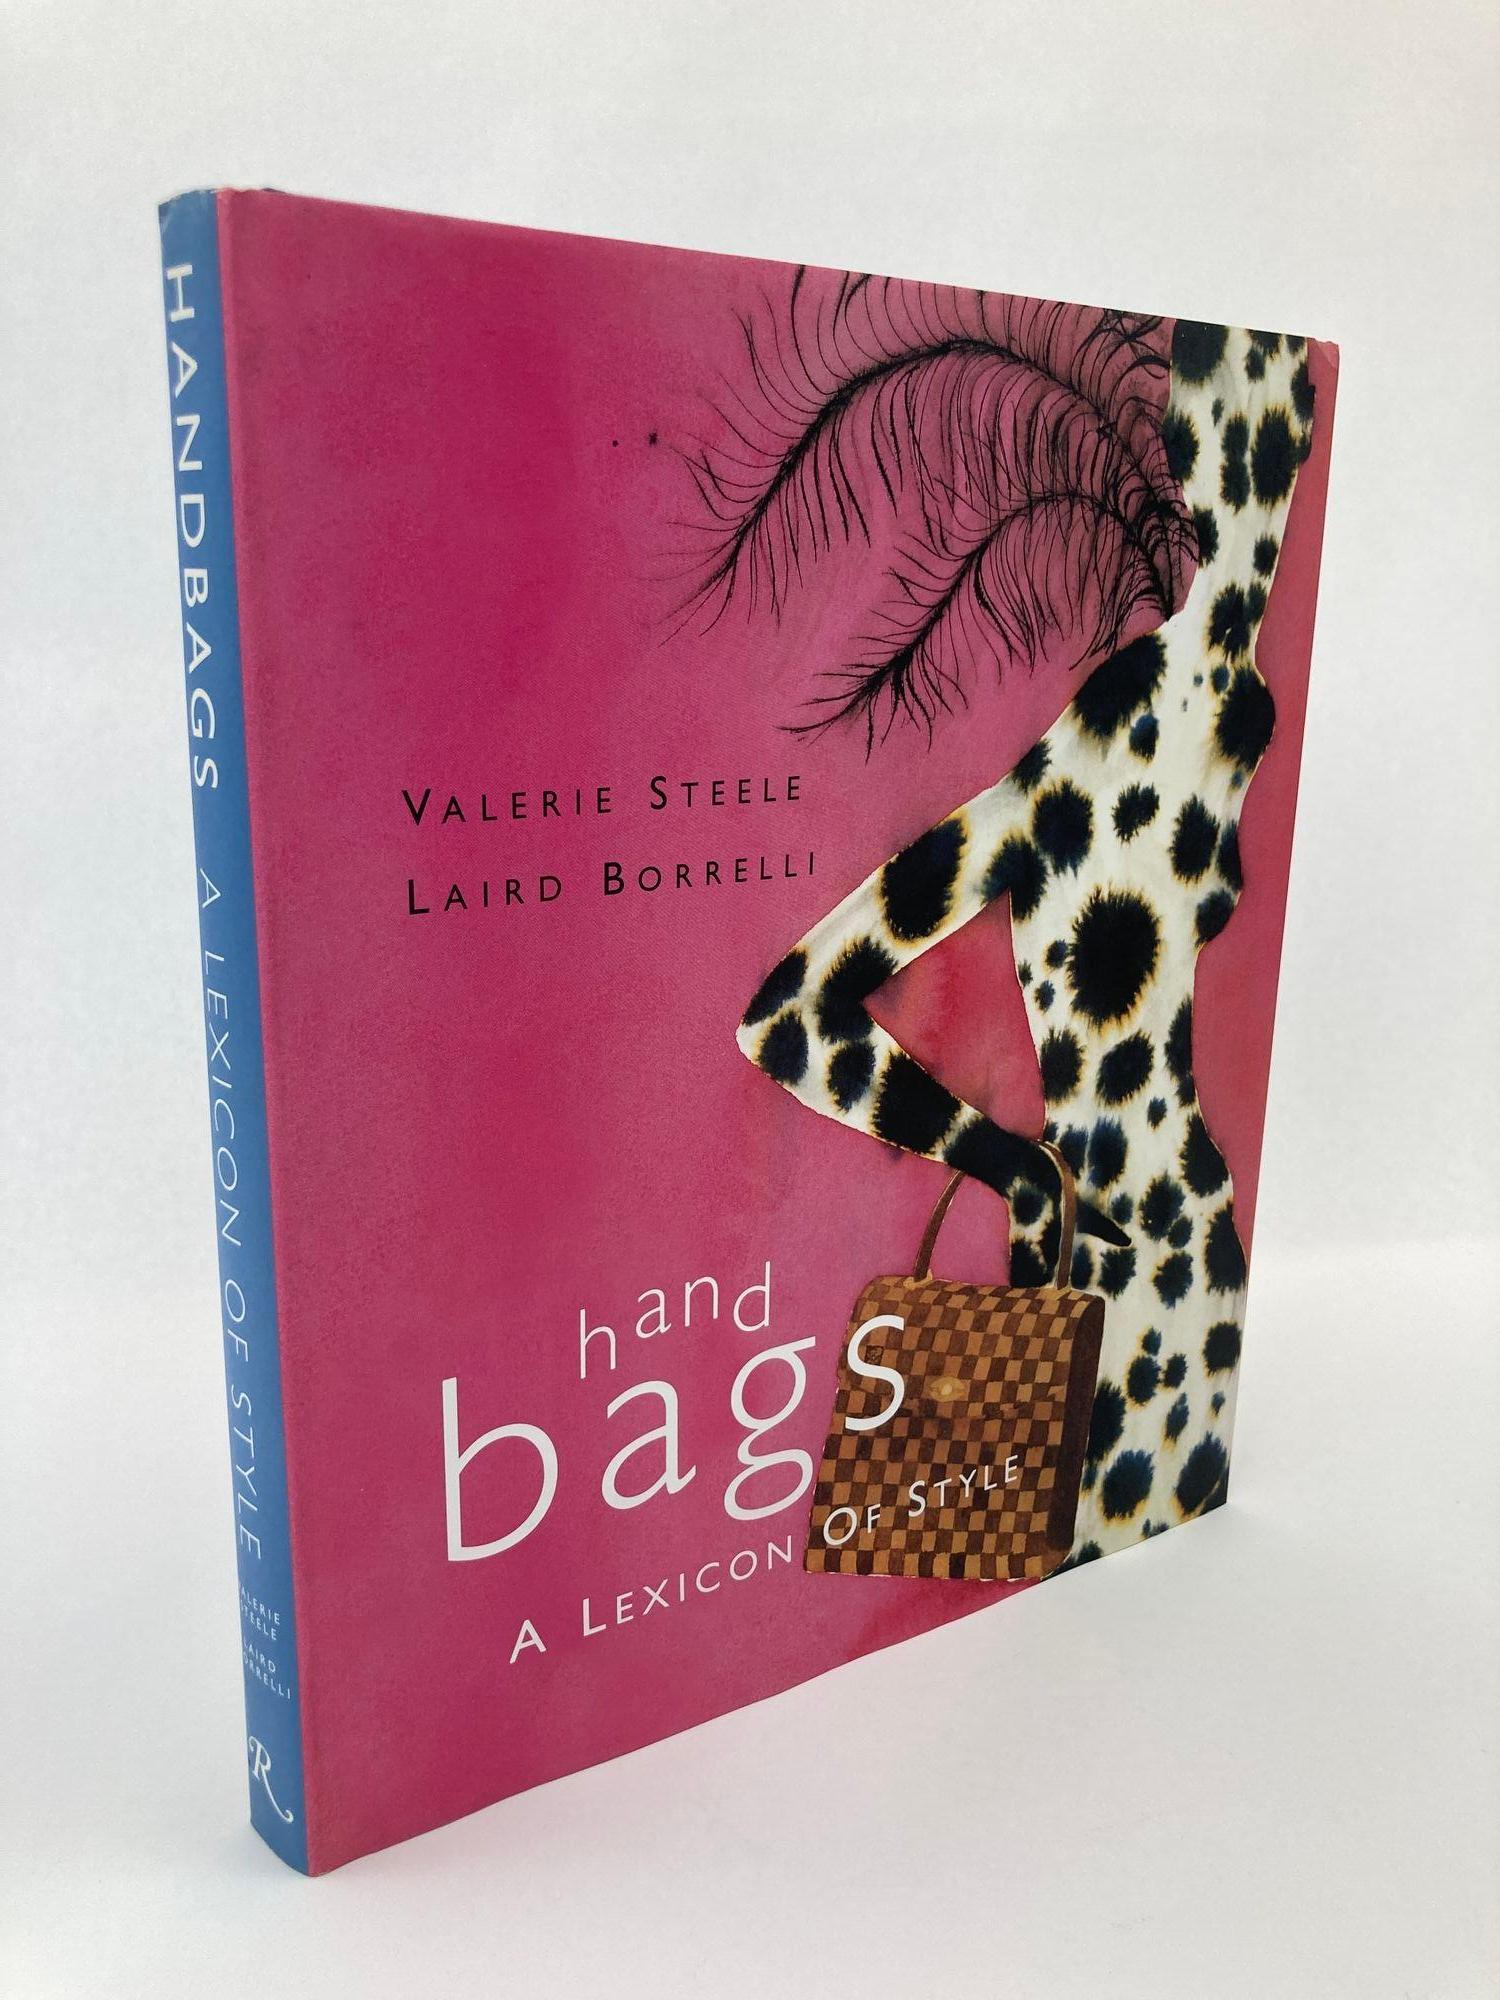 American Bags : A Lexicon of Style Valerie Steele, Laird Borrelli Hardcover Book 1st Ed. For Sale